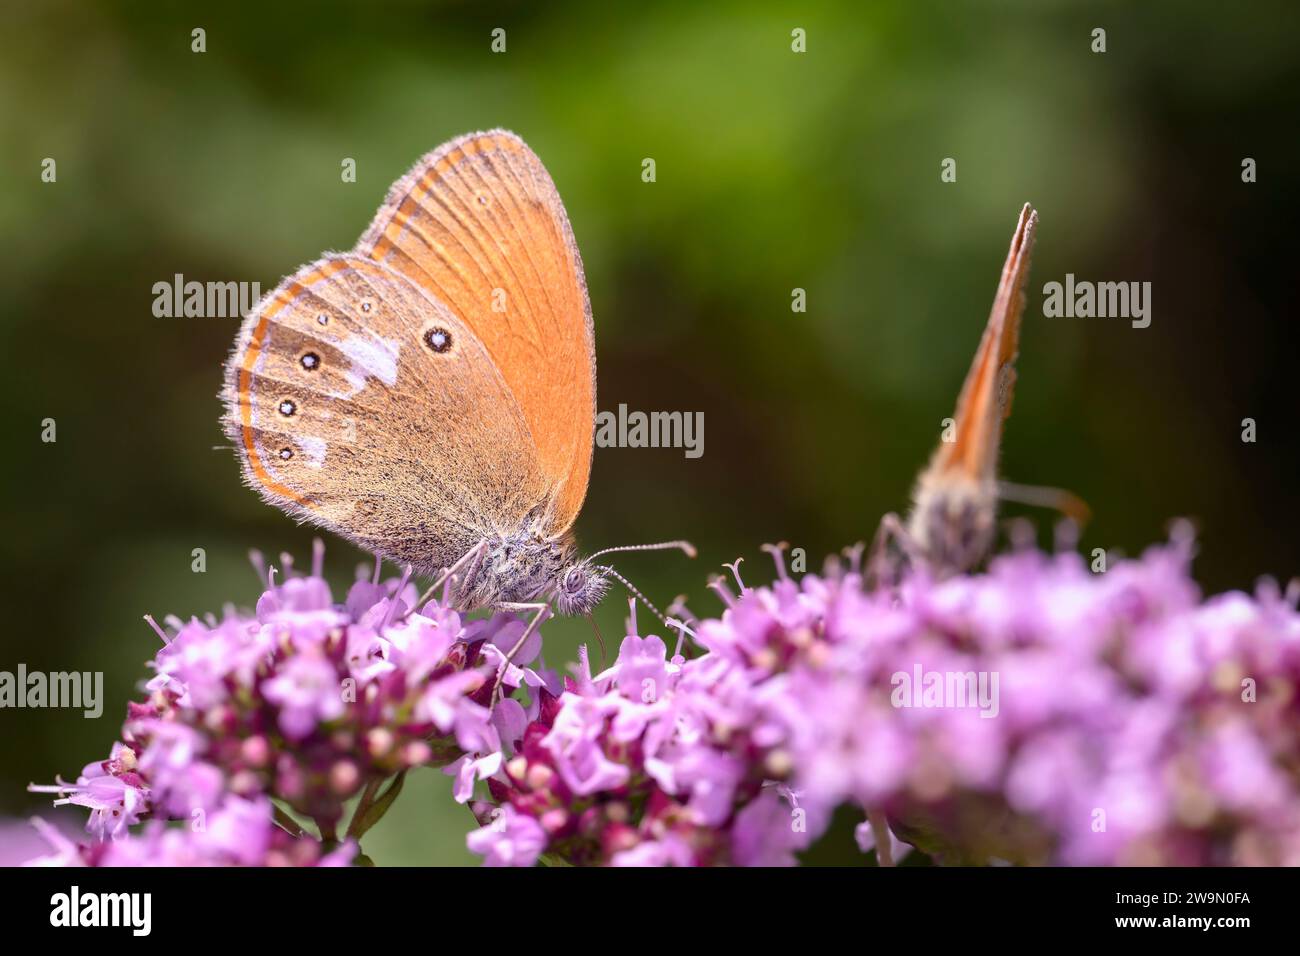 A chestnut heath butterfly - Coenonympha glycerion - sucks nectar with its trunk from the blossom of Origanum vulgare - Oregano or wild Marjoram Stock Photo